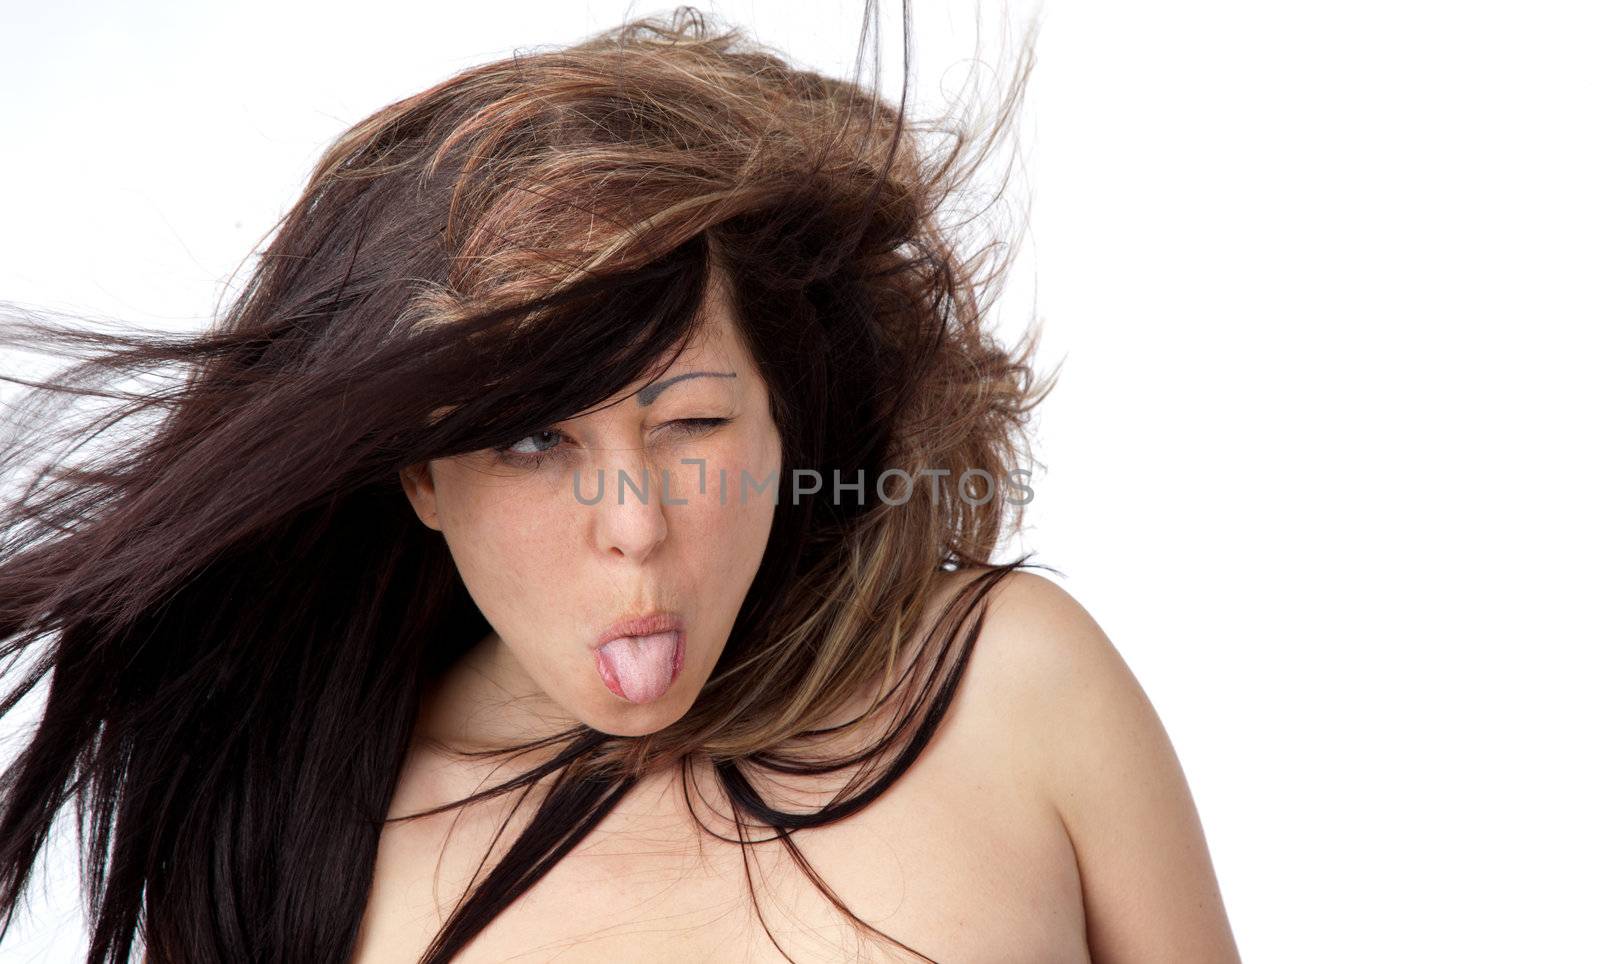 Portrait of topless young girl with tongue out on white background